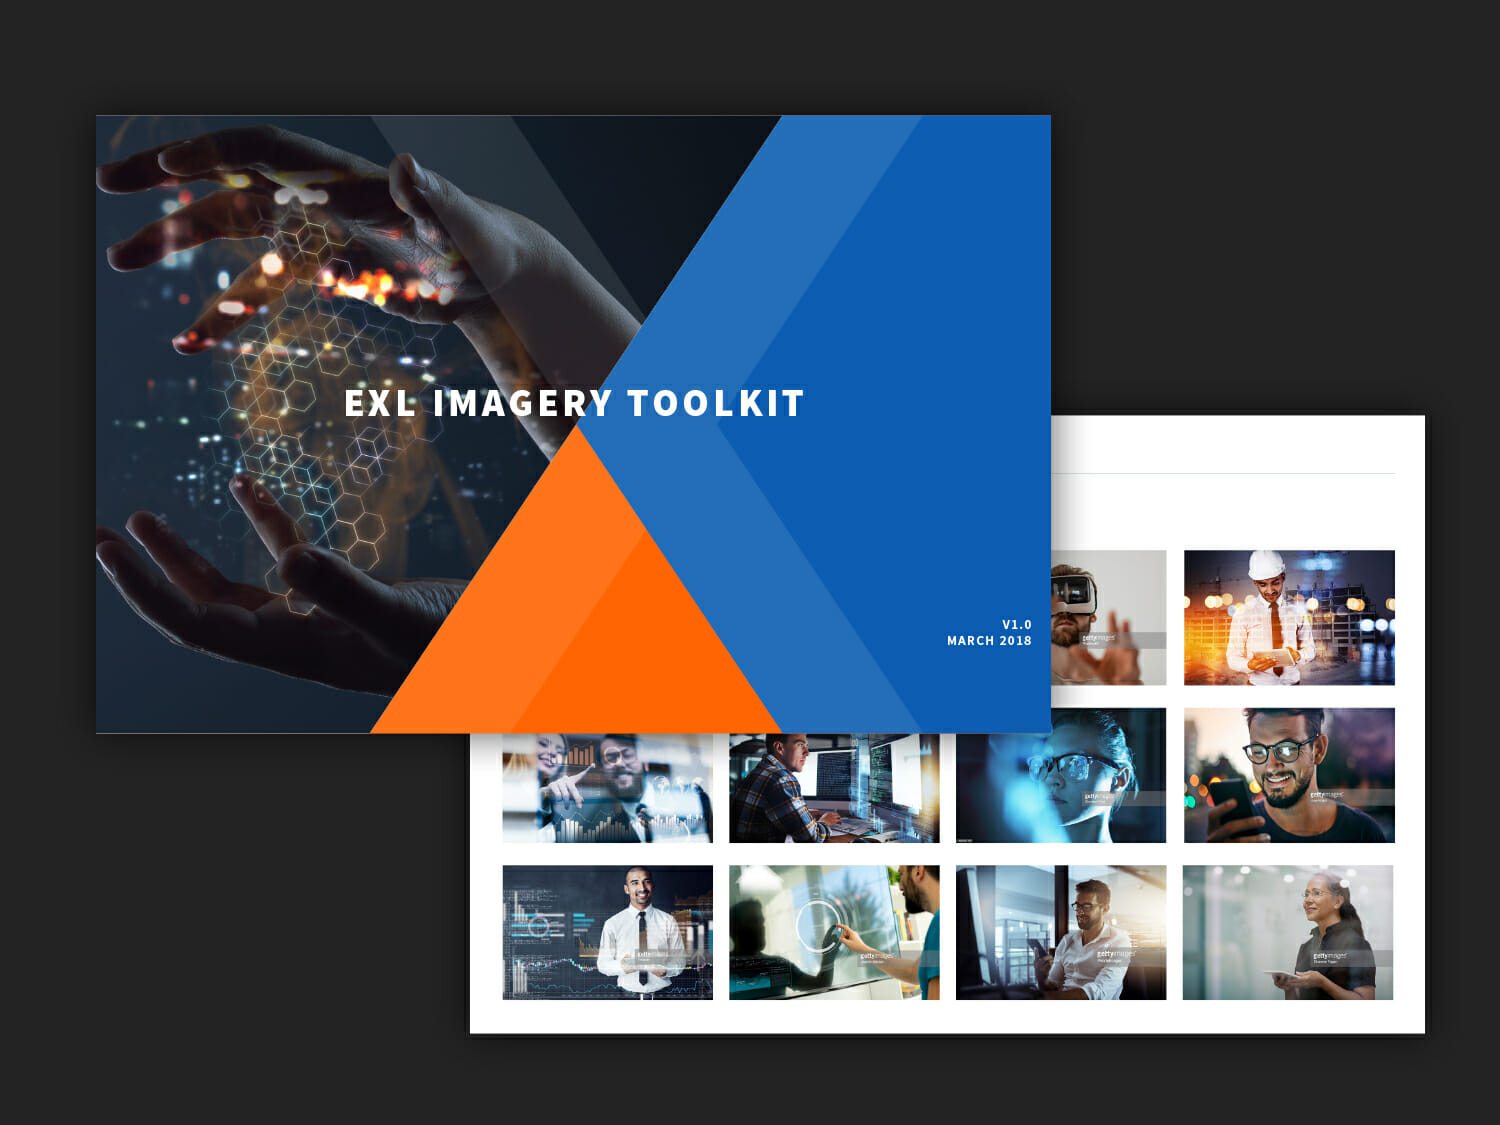 Exl imagery toolkit with hands in one image, small images of people using program